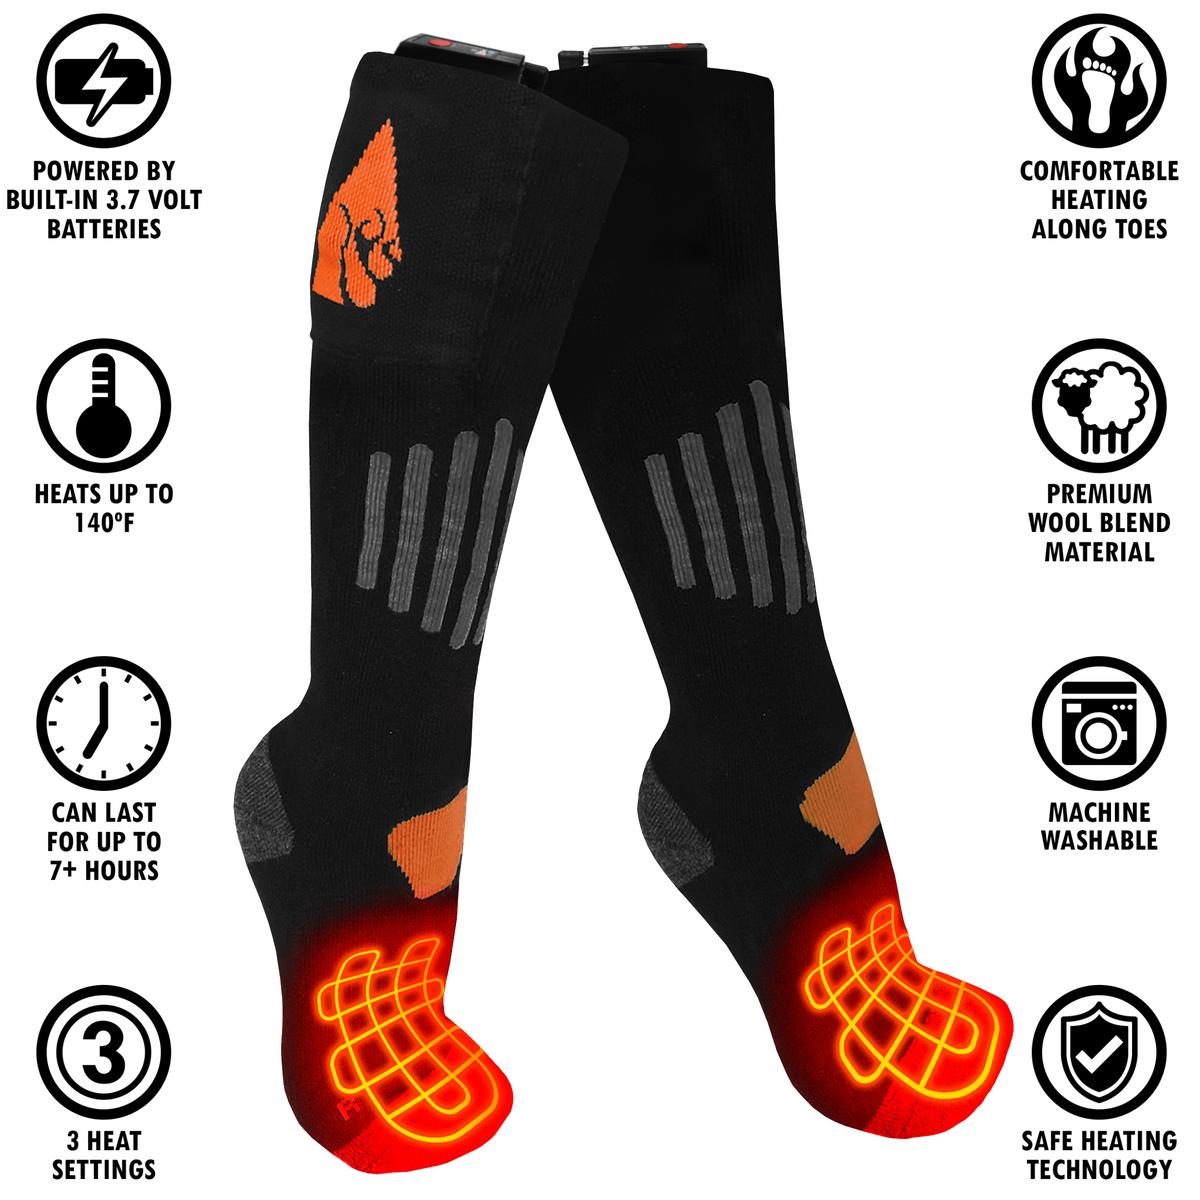 ActionHeat 3V Wool Rechargeable Battery Heated Socks 1.0 - Info